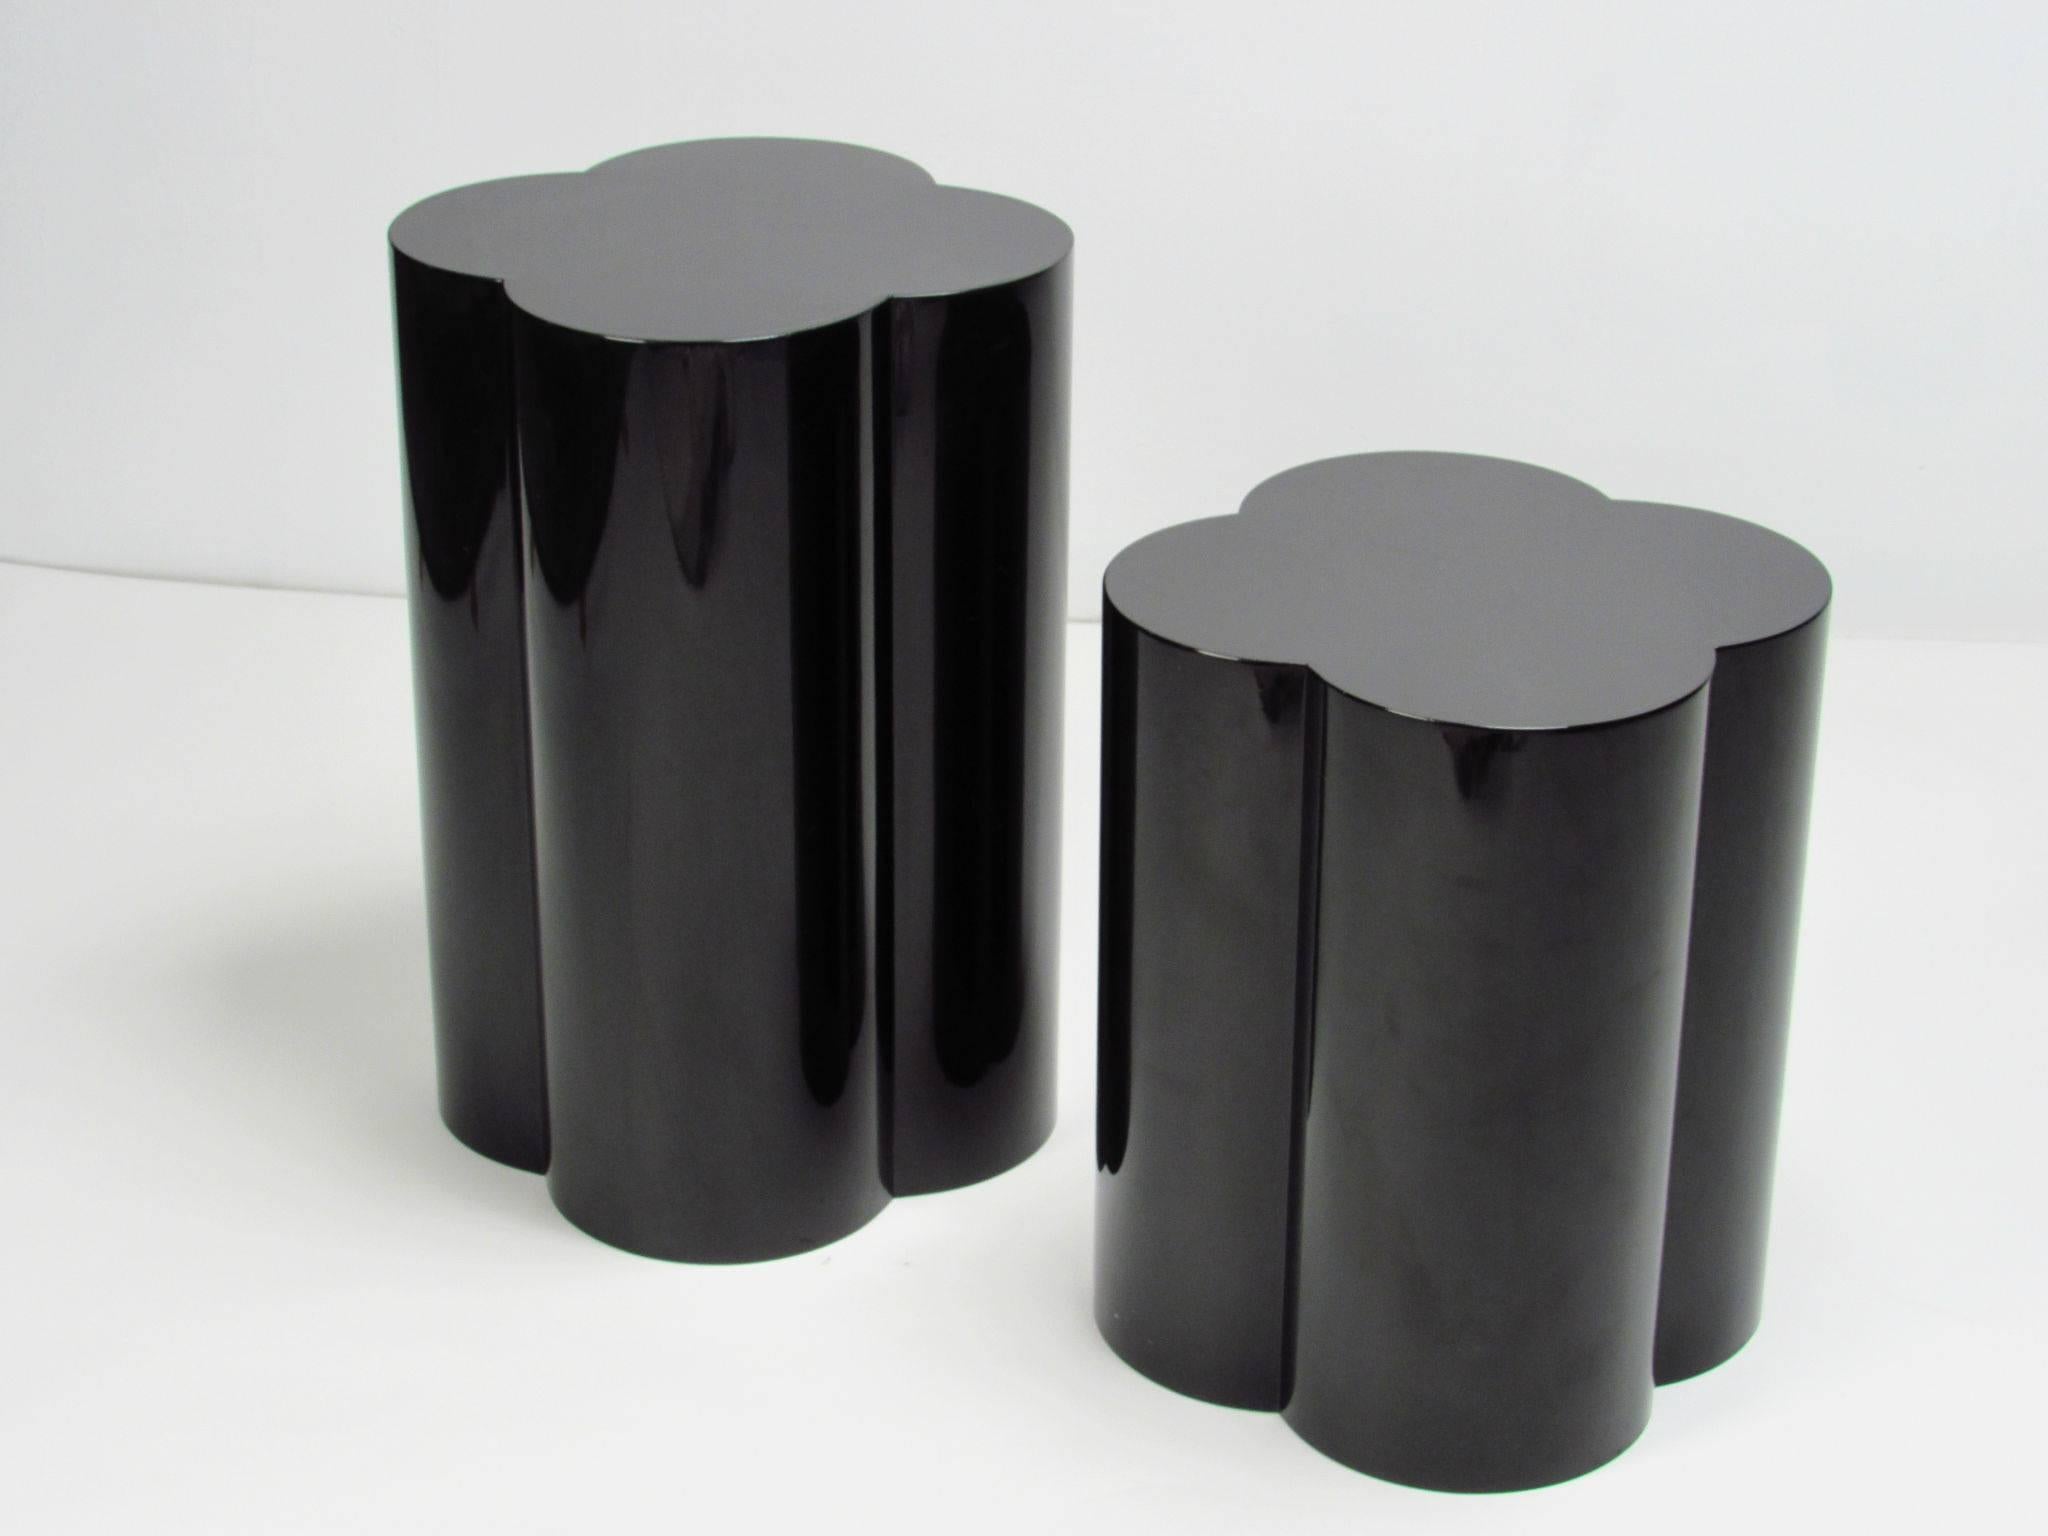 Pair of Italian black lacquered cloverleaf occasional side tables, circa 1980s. Label on bottom

Dimensions: 
Taller table: 16.50